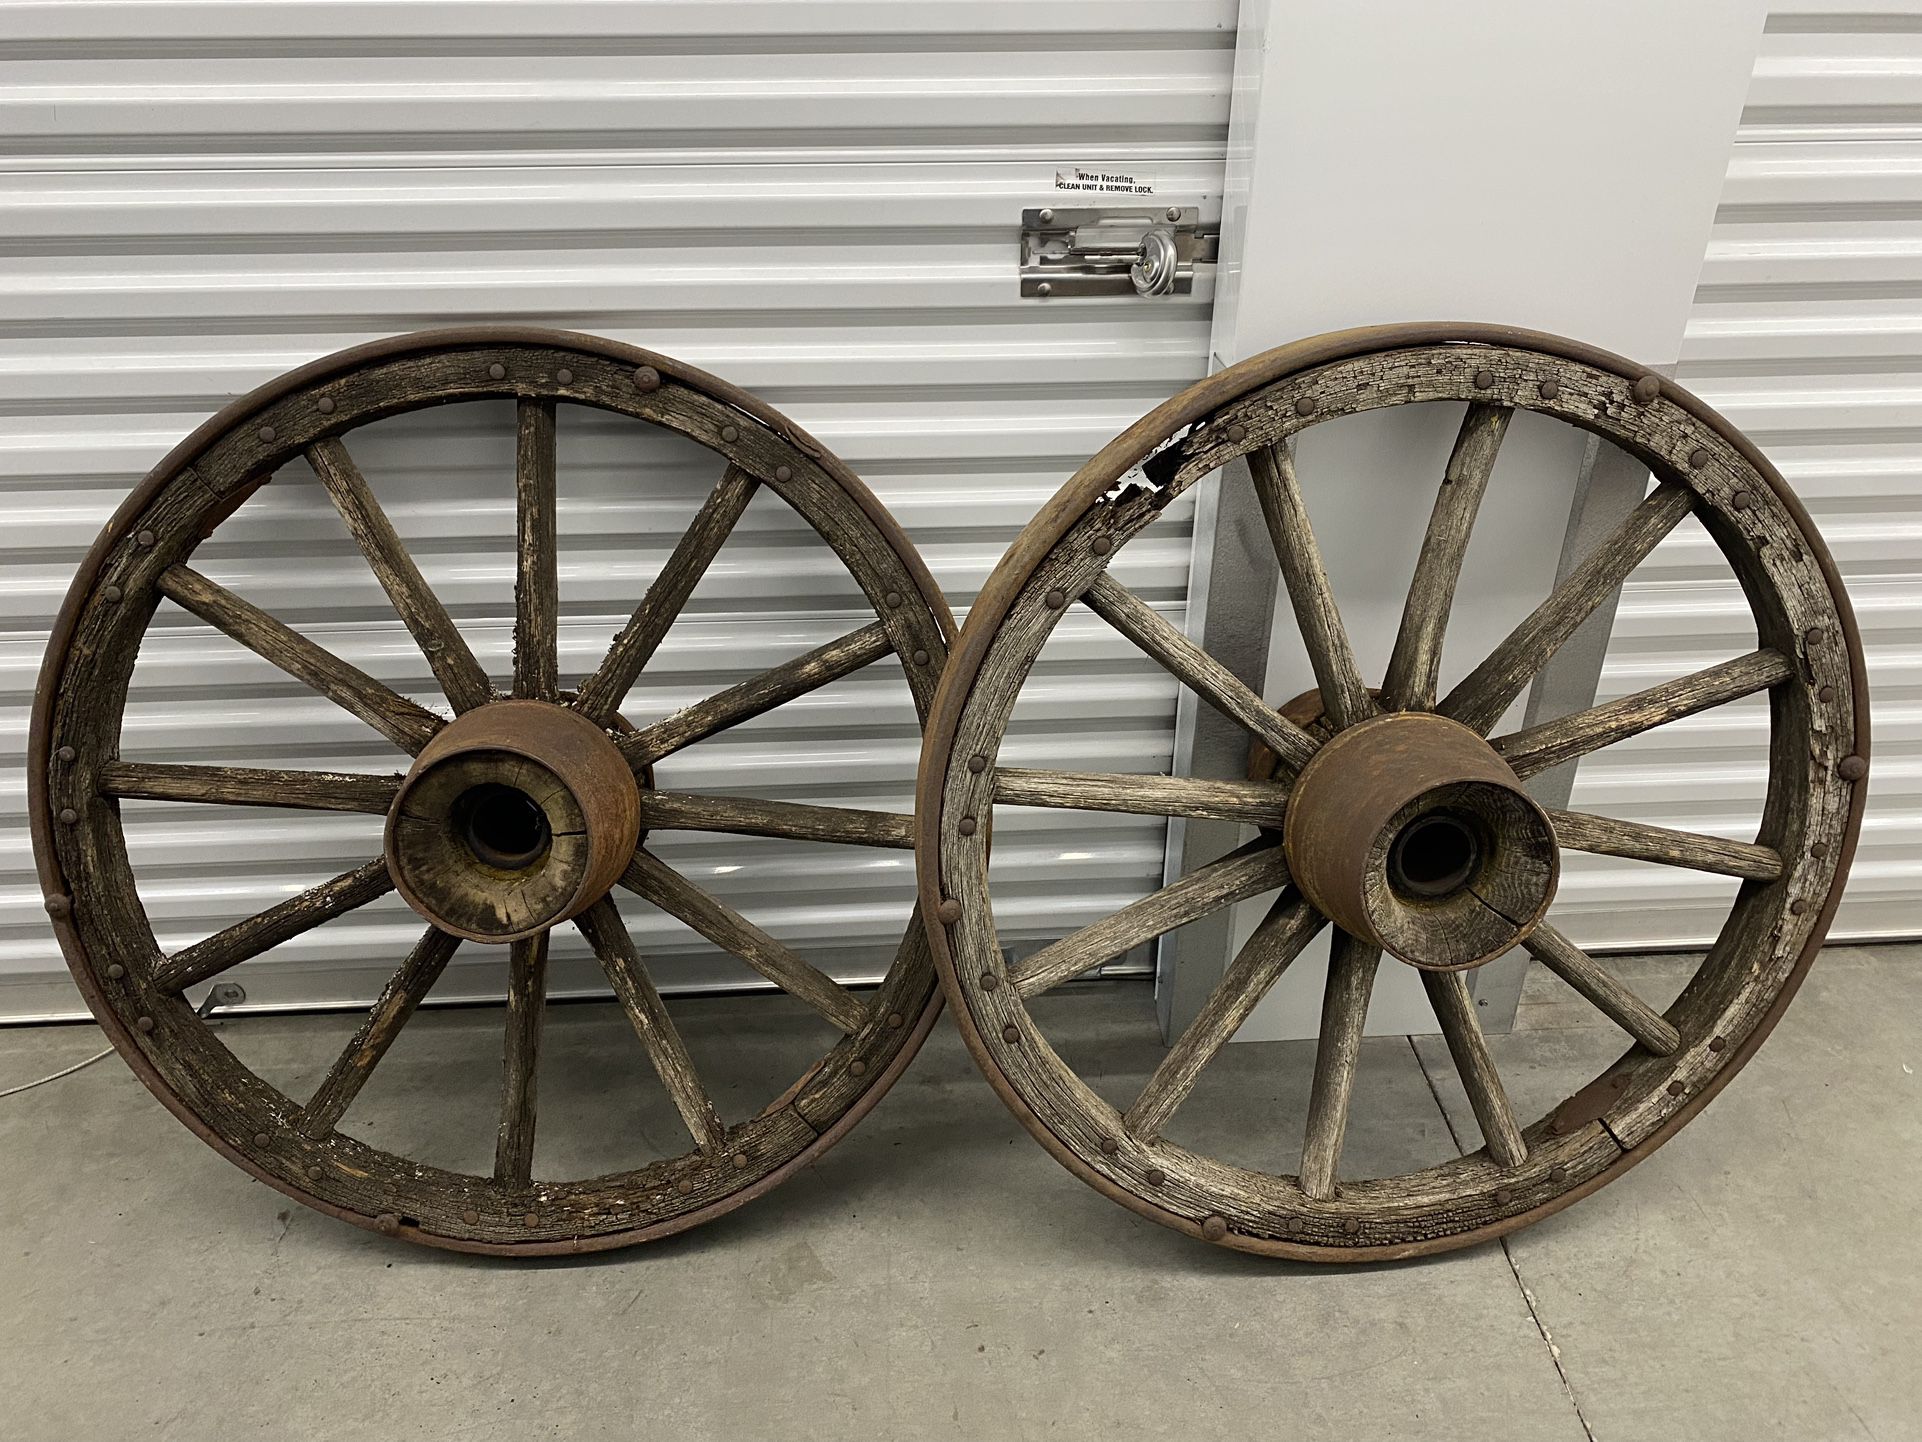 Authentic Rustic Wagon Wheels 